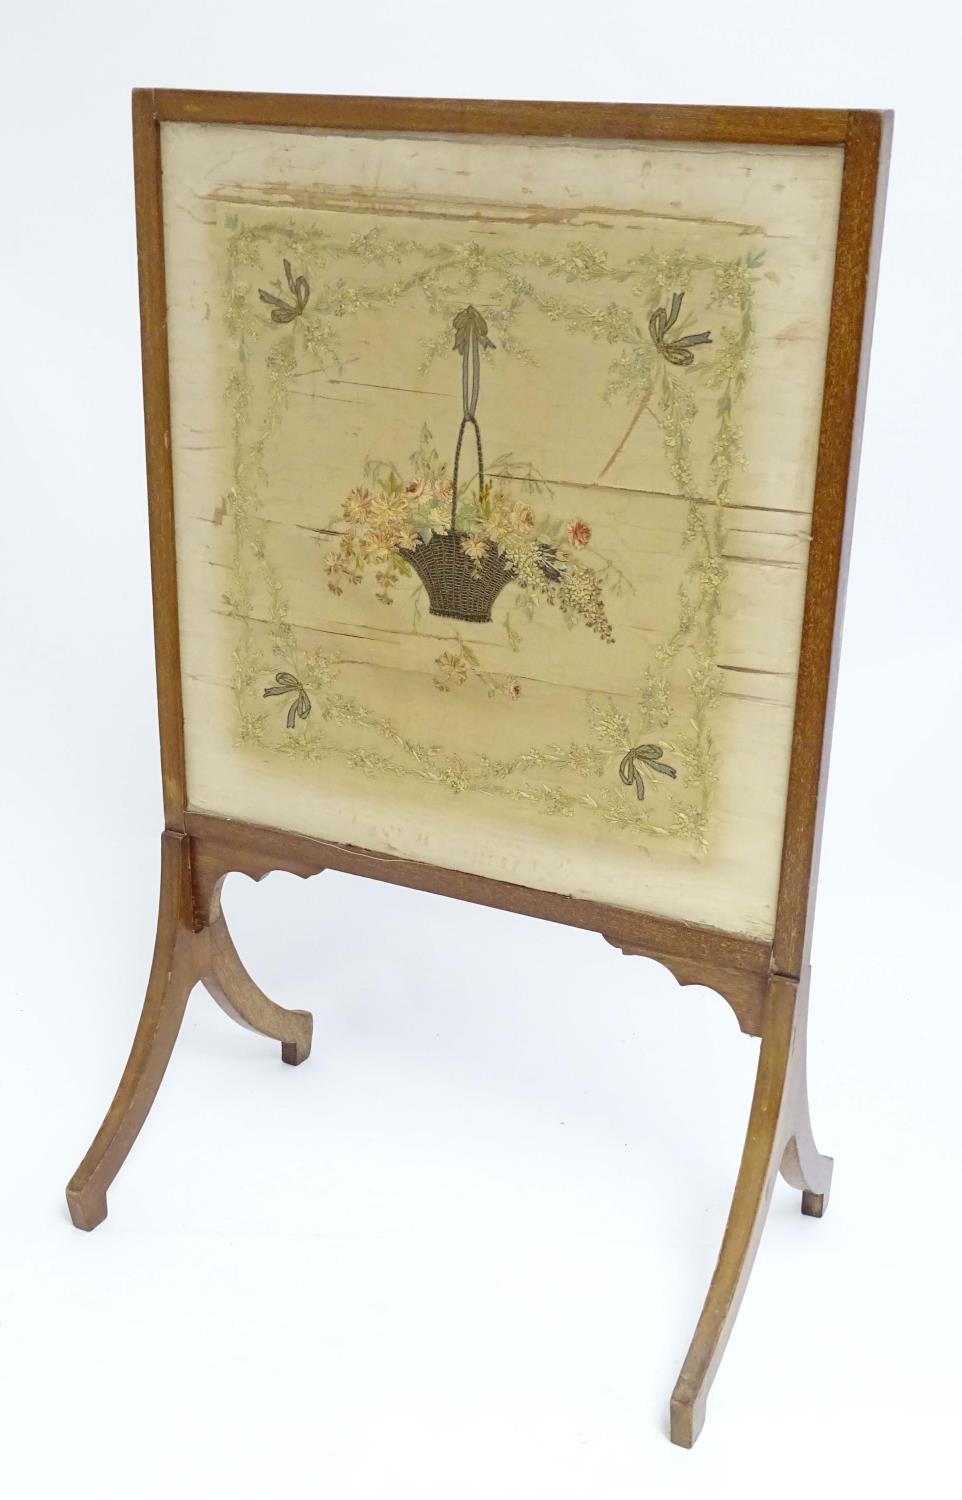 An early 19thC silk needlework with fine floral decoration, bows, swags and a woven basket in a